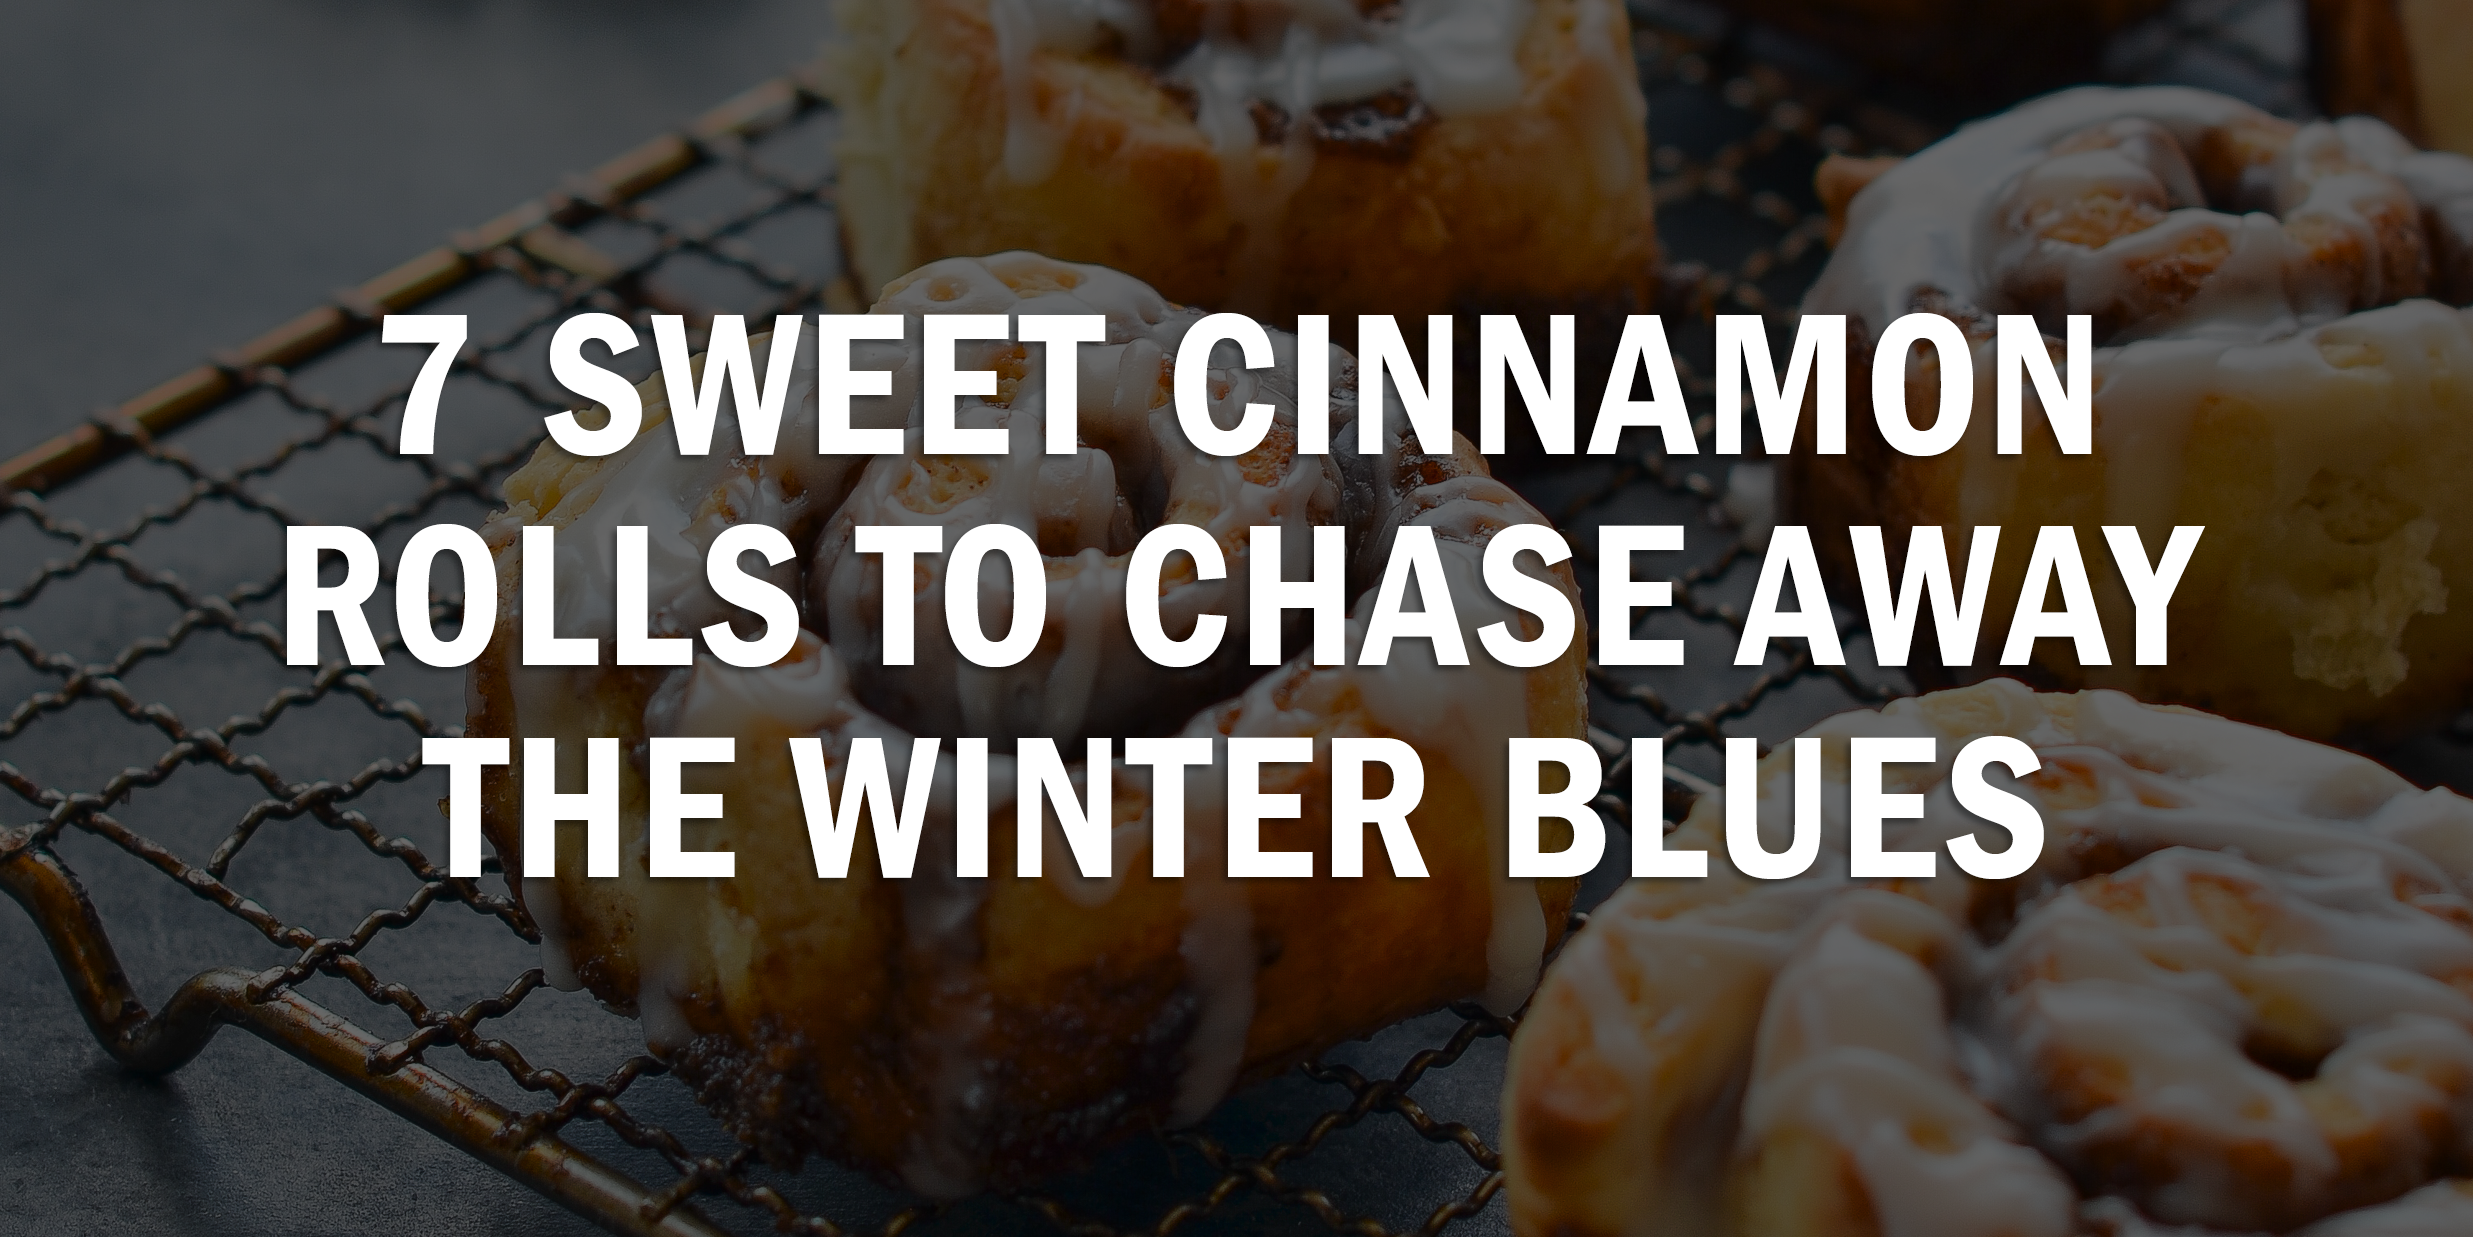 7 Sweet Cinnamon Rolls to Chase Away the Winter Blues